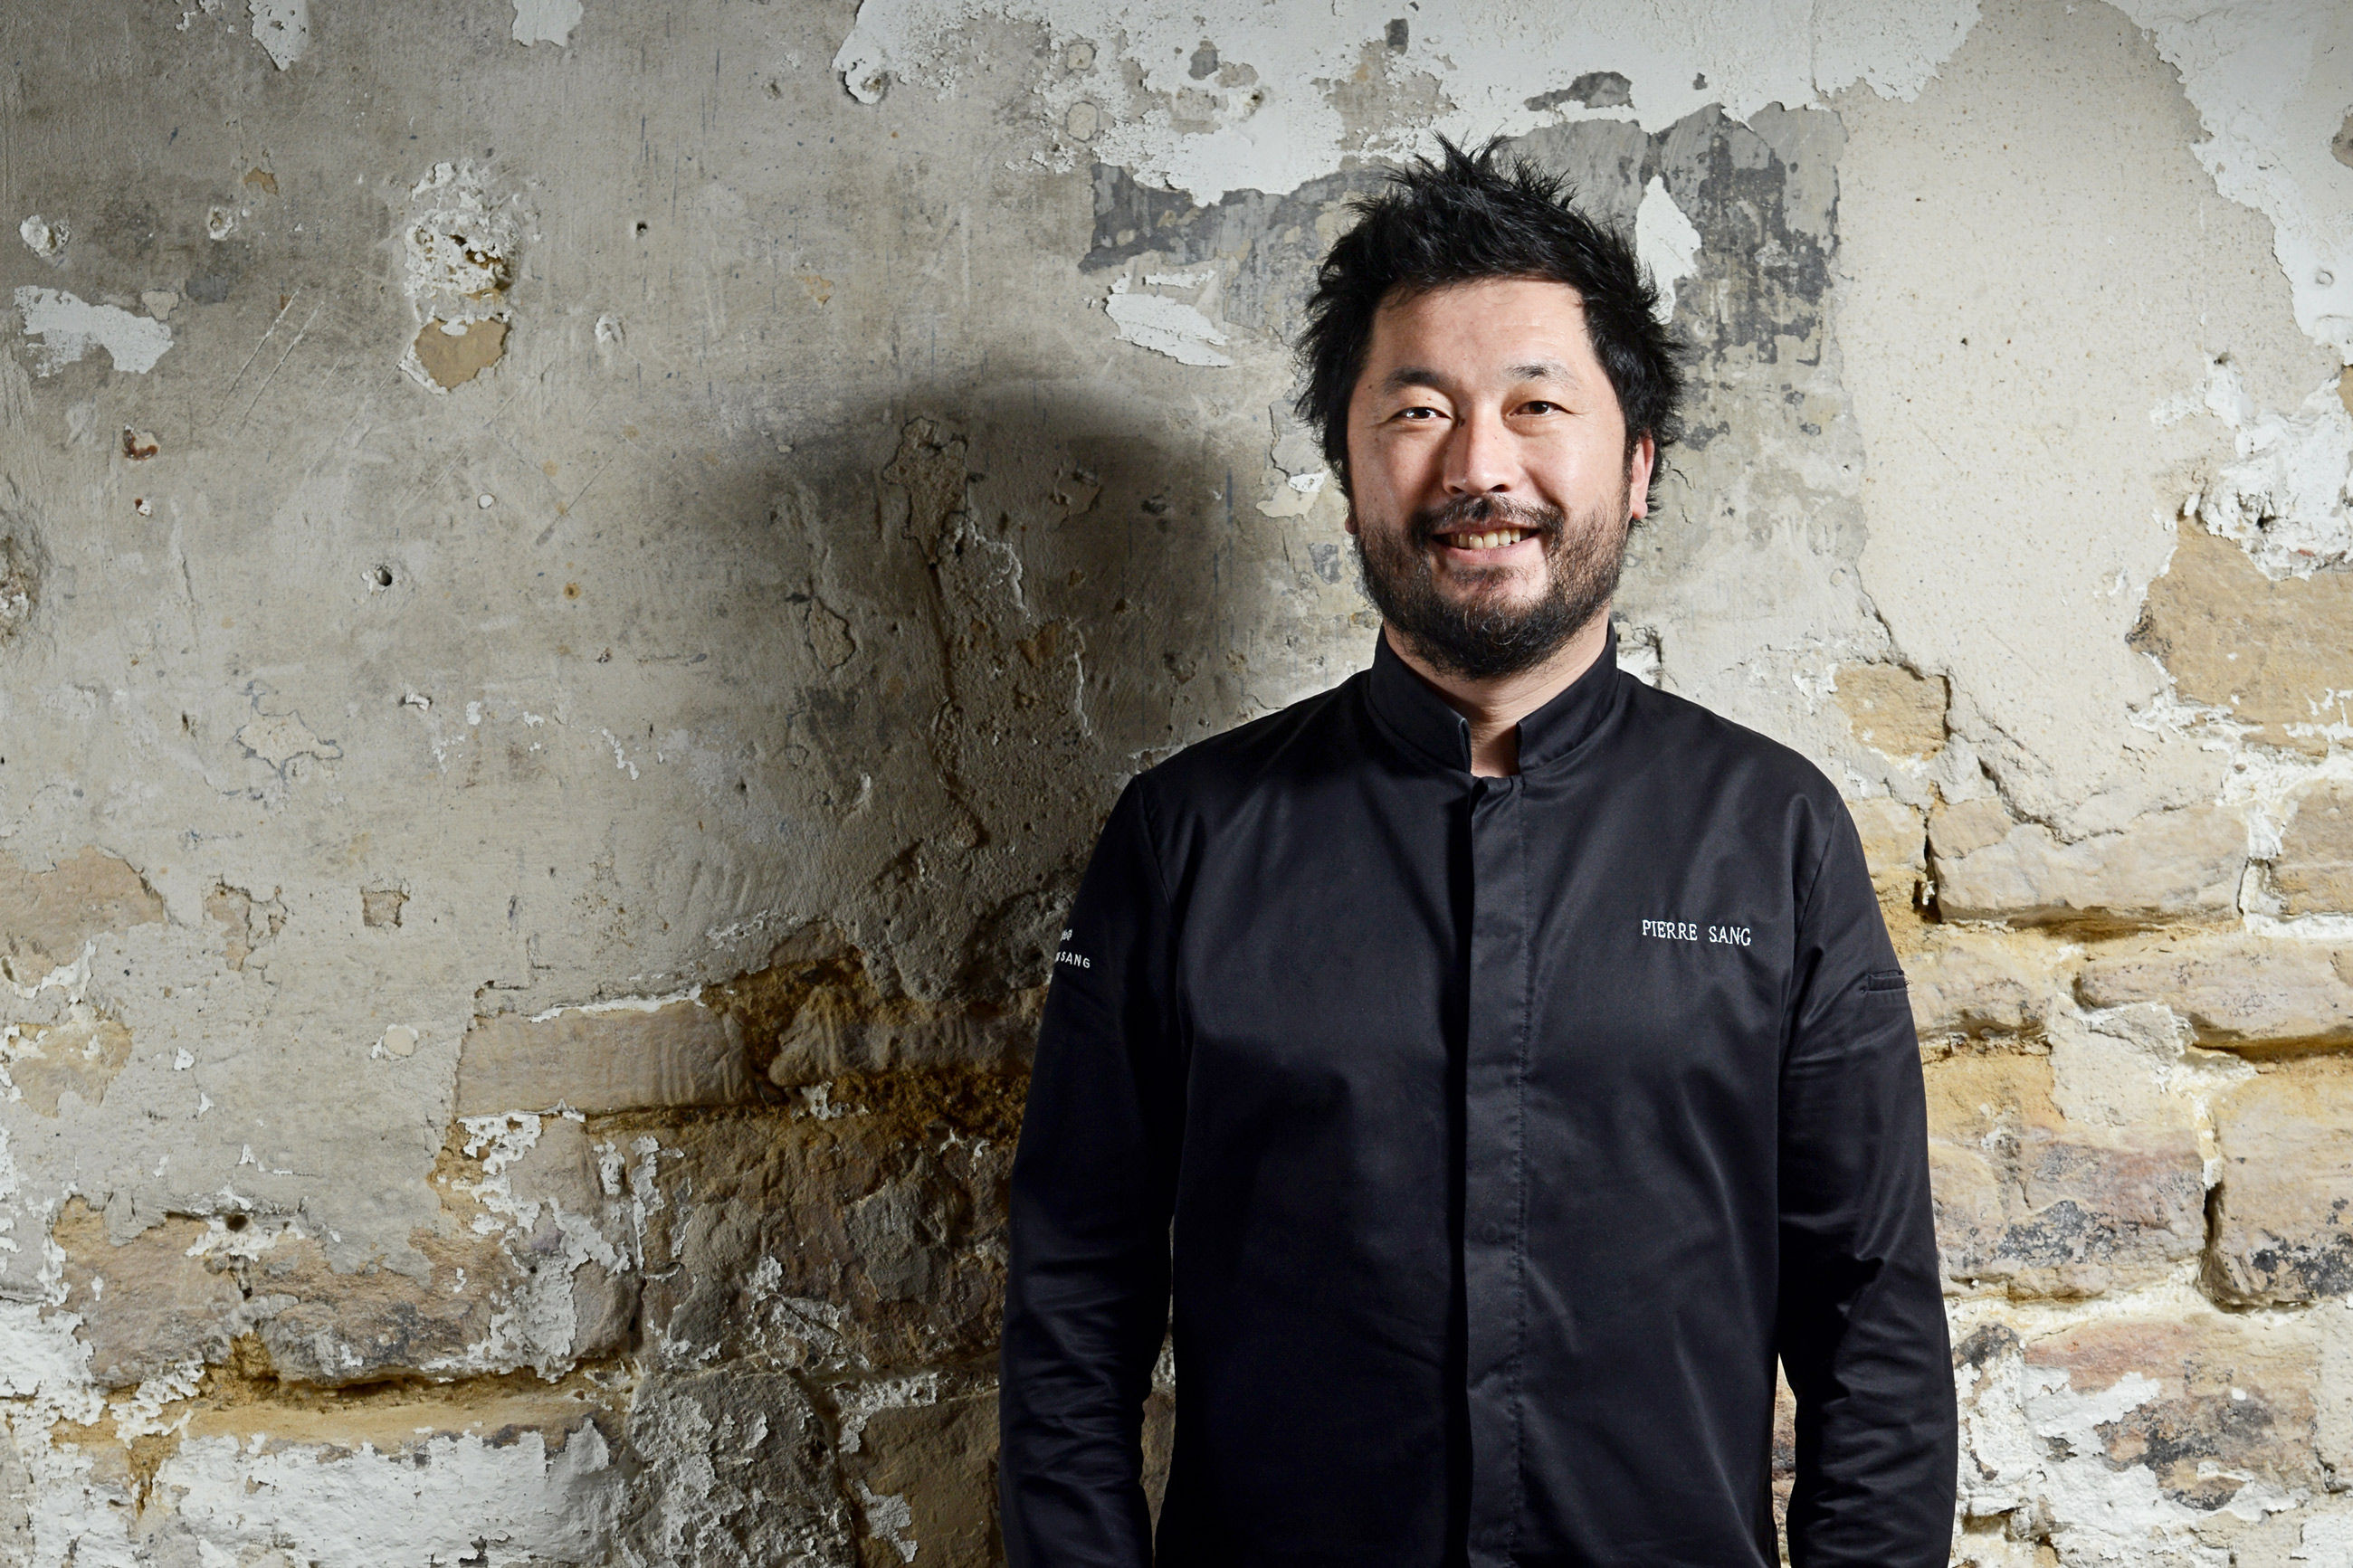 27 Questions: Pierre-Sang Boyer, (TV) Chef and owner of 3 namesake locations